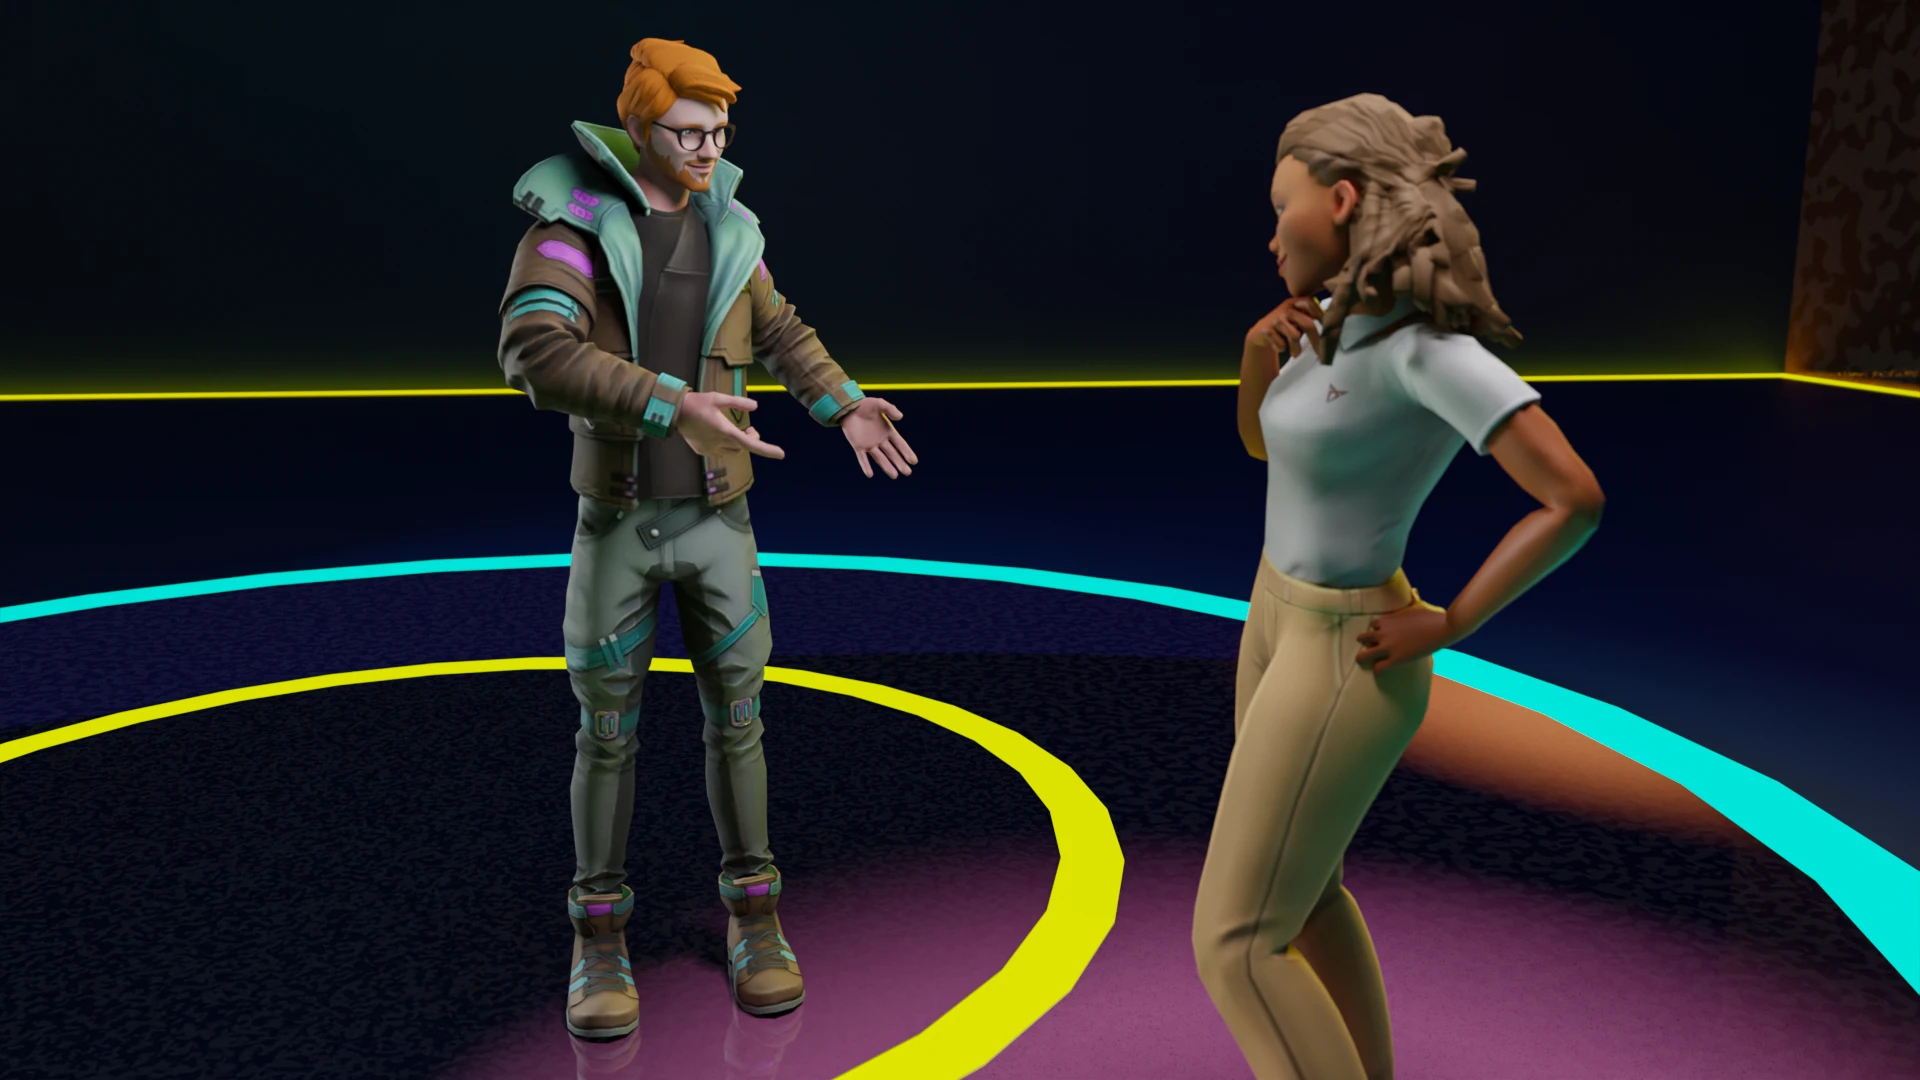 The Future of Recruiting: Finding Talent In The Metaverse